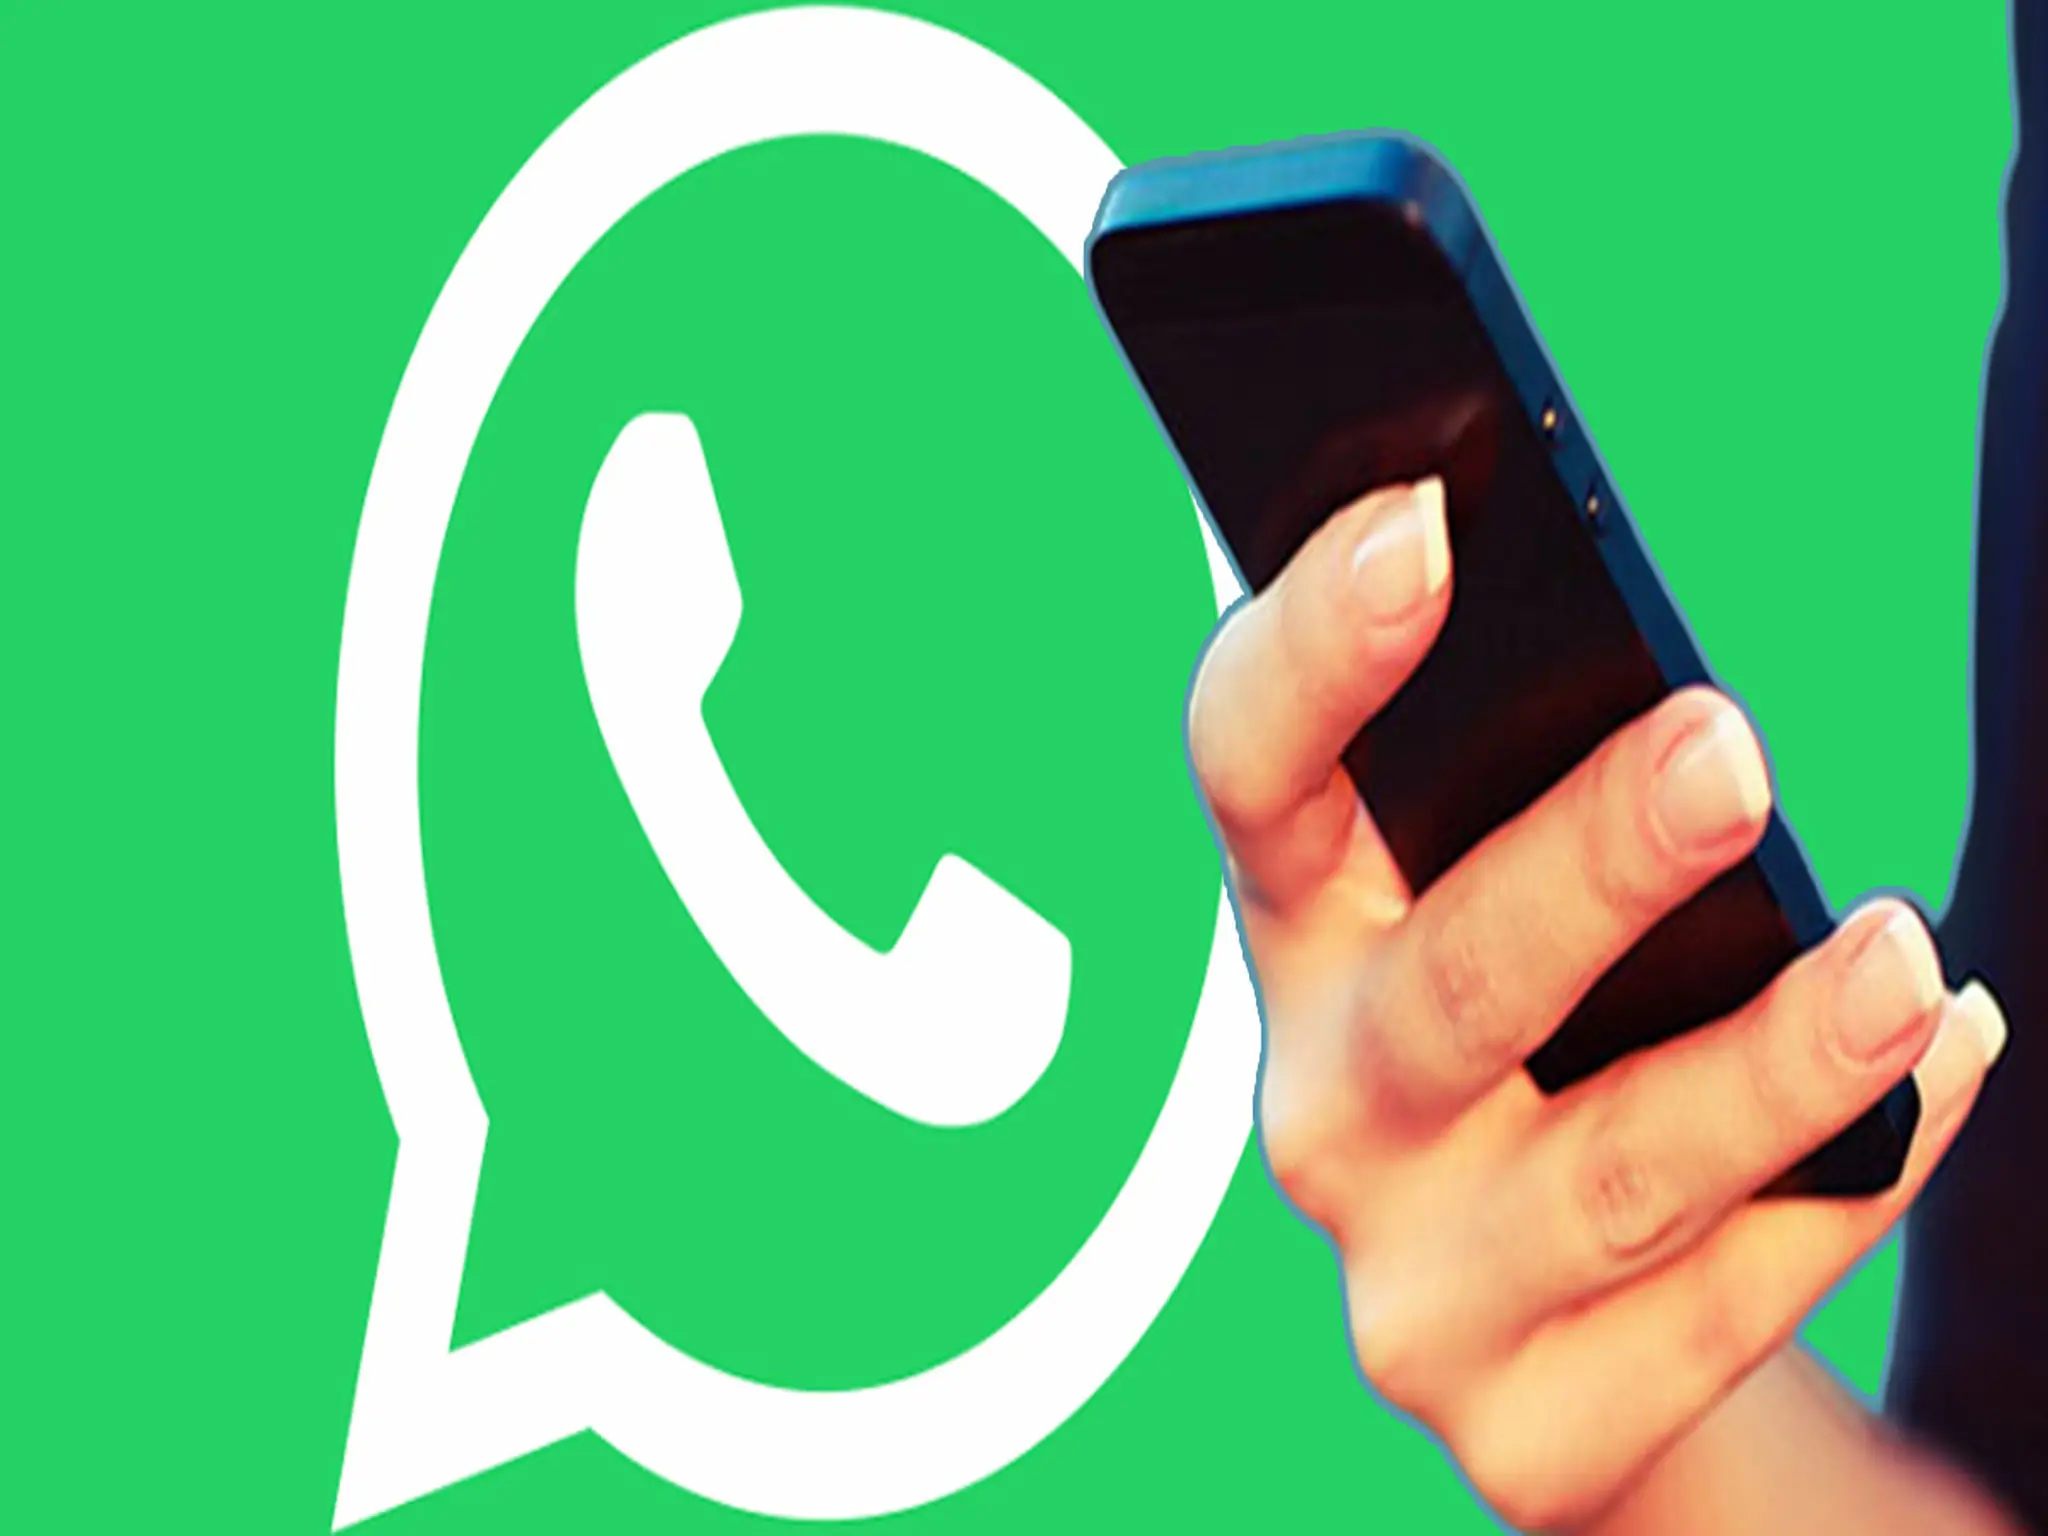 WhatsApp's new chat lock feature to keeps chats private